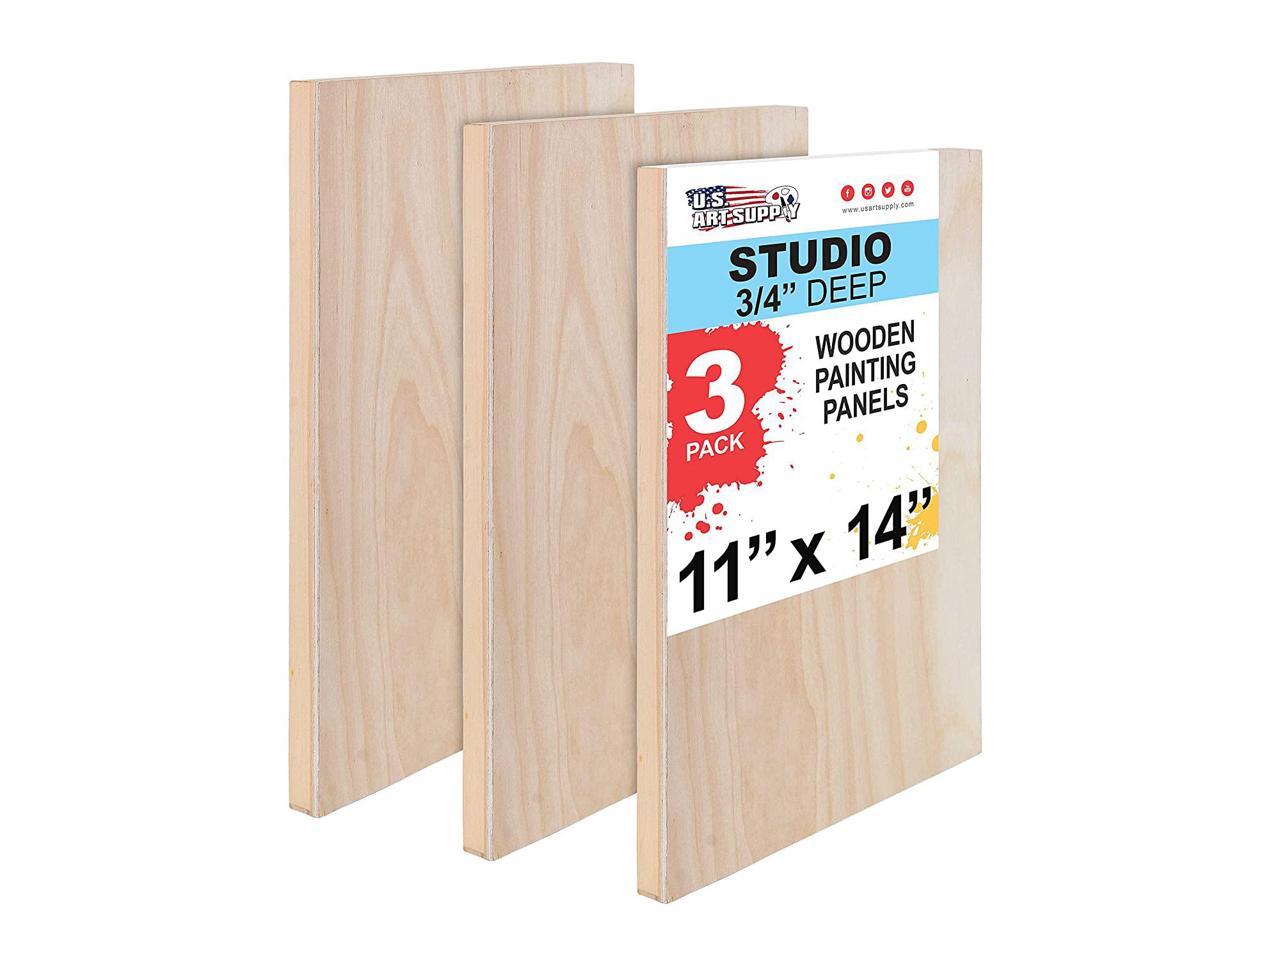 Craft 5 x 7 Pack of 4 Studio 3/4 Deep Board for Pouring Art Unfinished Wood Canvas Panels Kit with Accessories Painting and Encaustic Art 